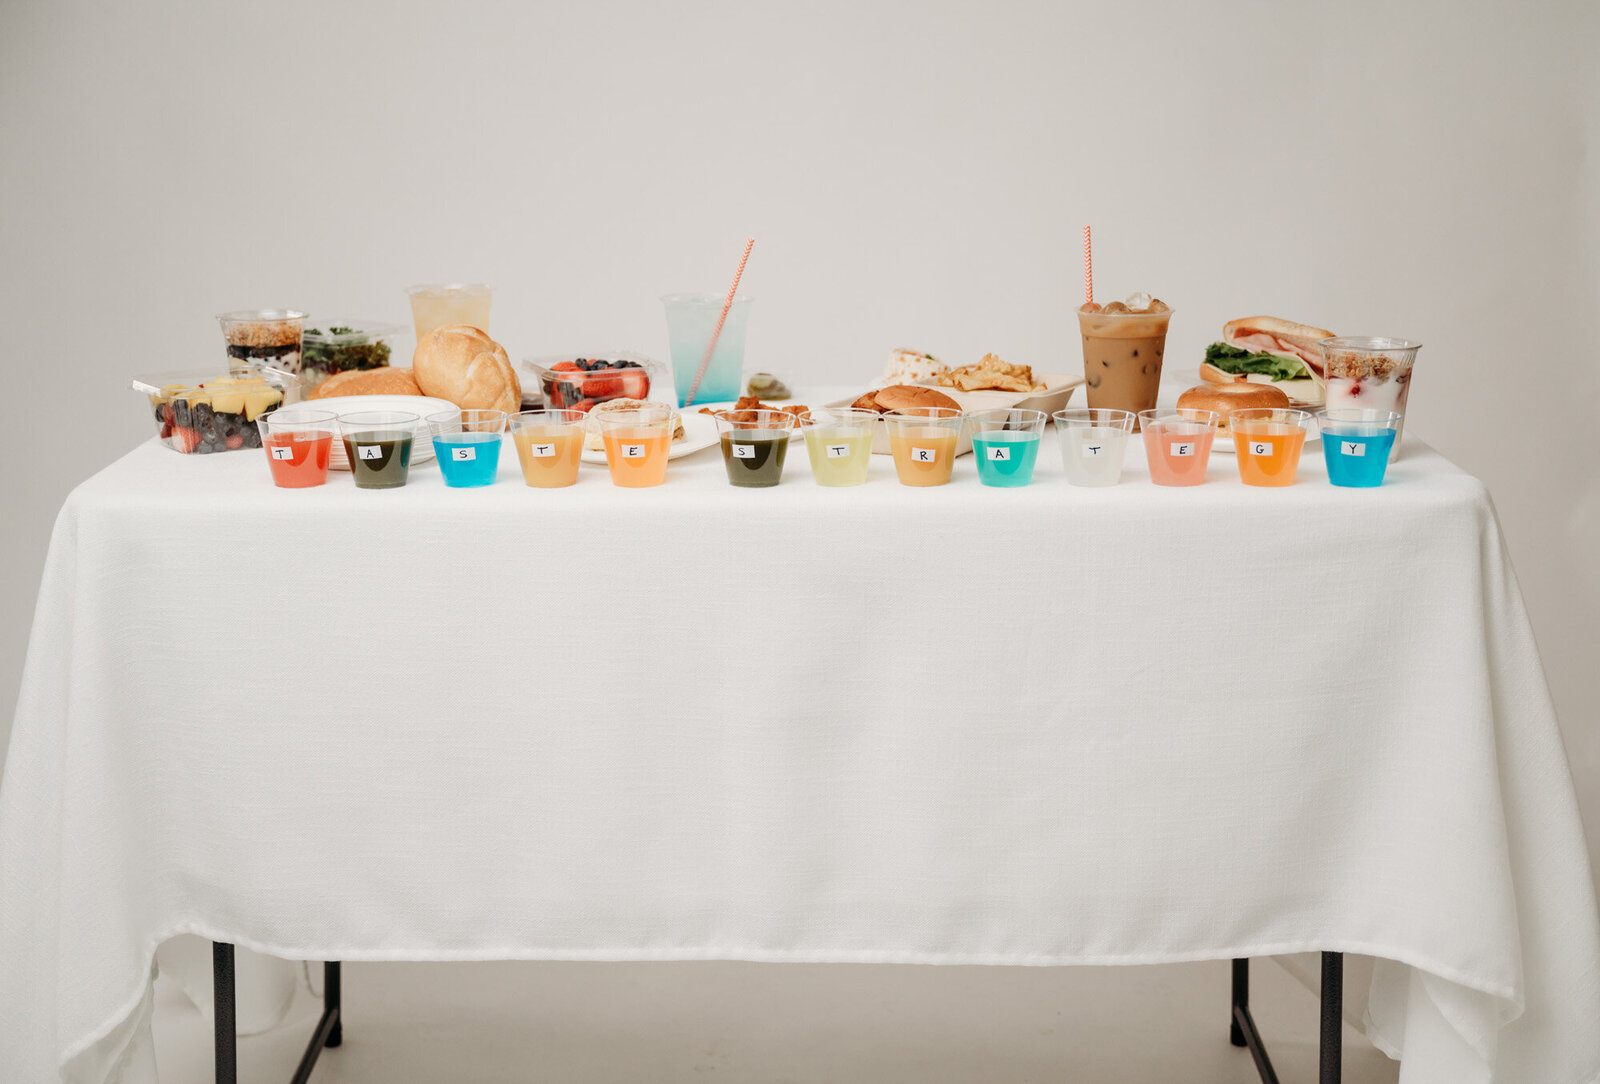 colorful drinks spelling out "Taste Strategy" on a table full of food